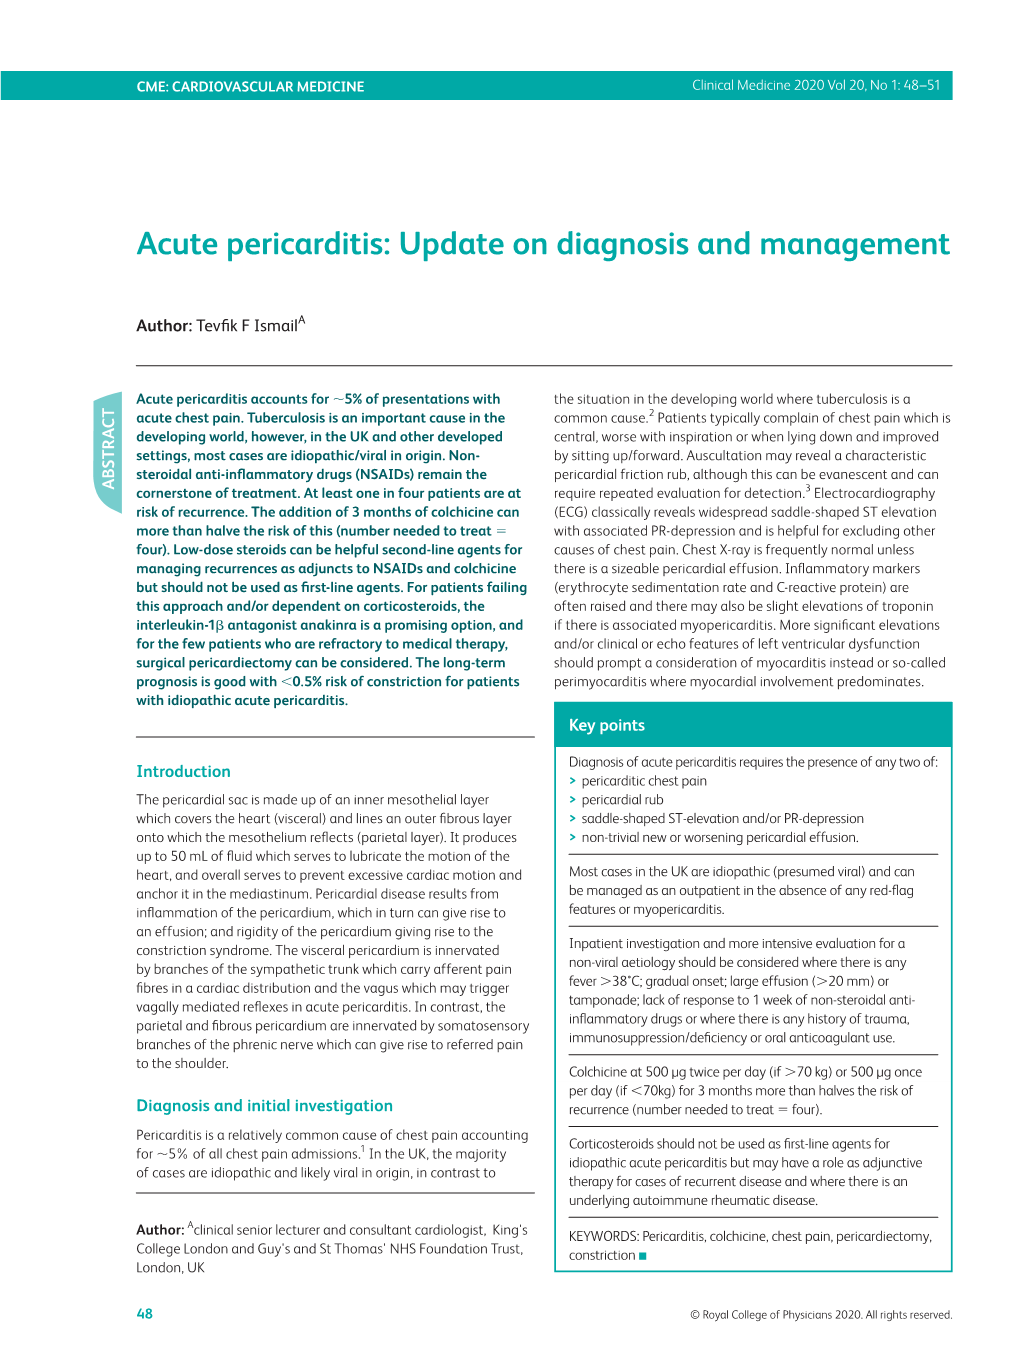 Acute Pericarditis: Update on Diagnosis and Management